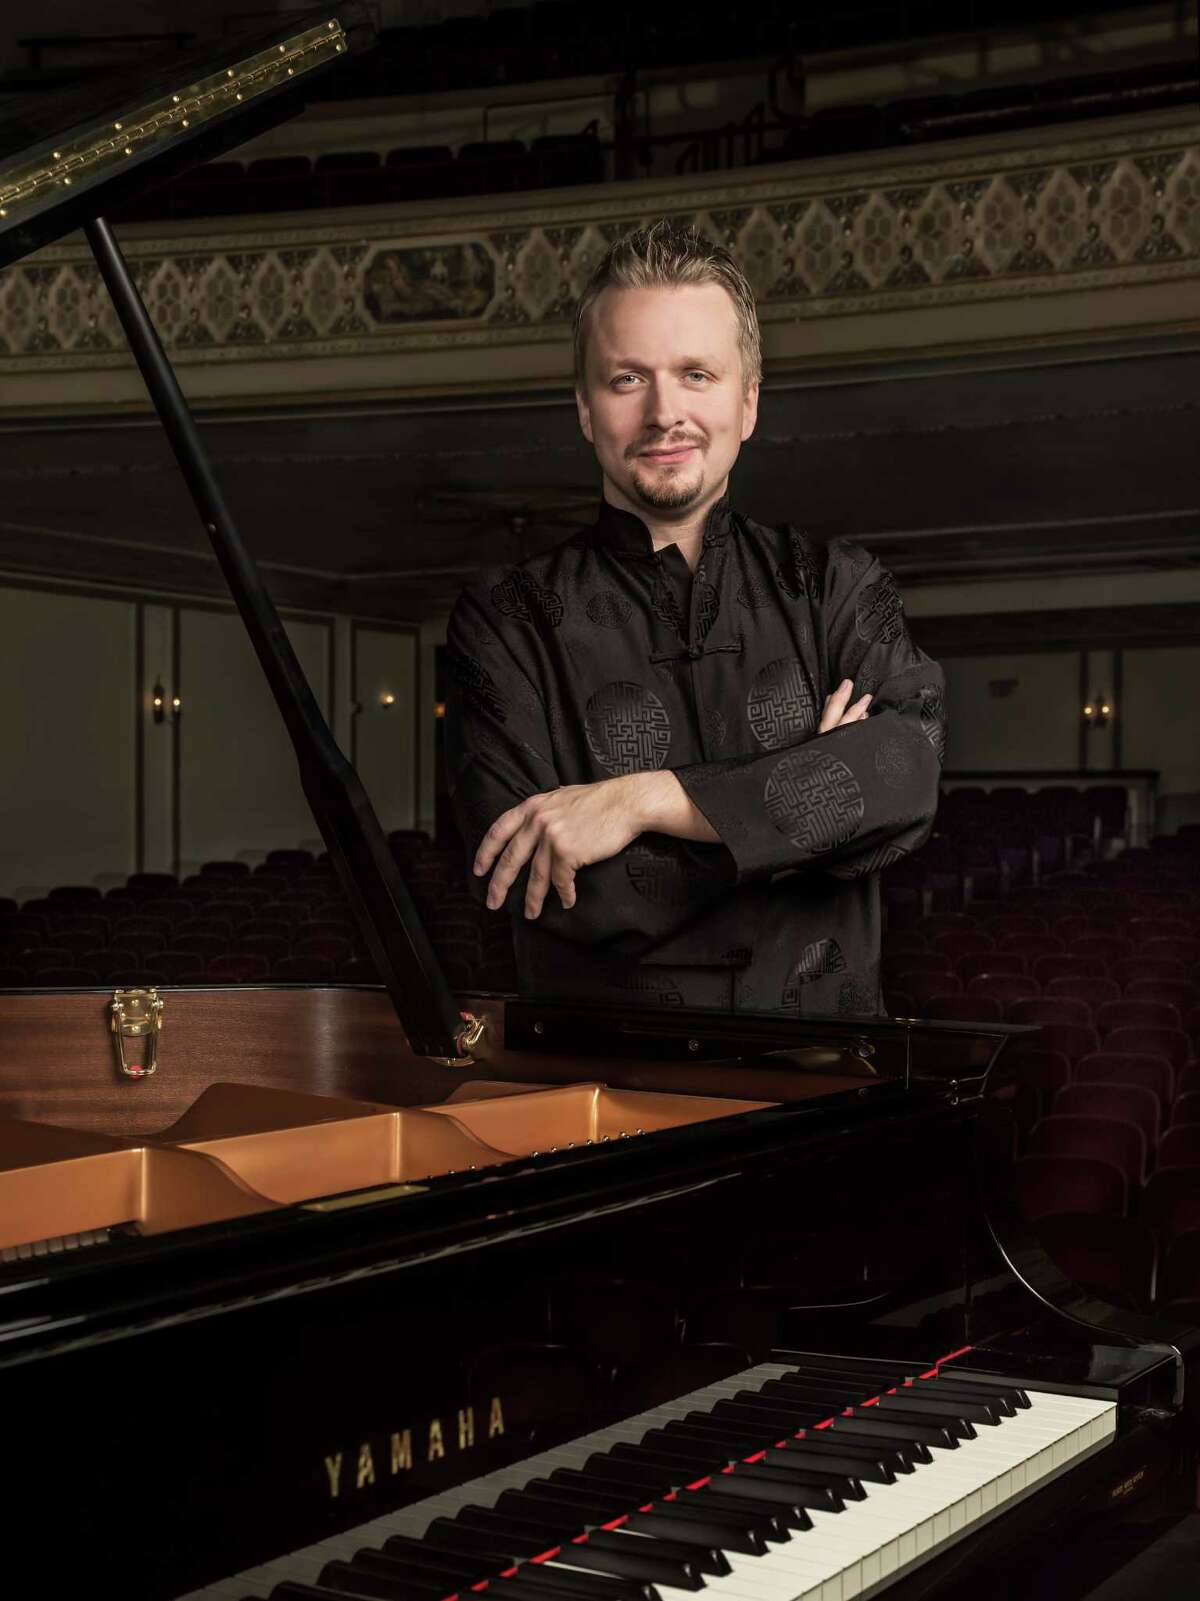 Russian pianist Ilya Yakushev will perform with the Fairfield County Chorale & Orchestra on Saturday, May 14, in Norwalk.